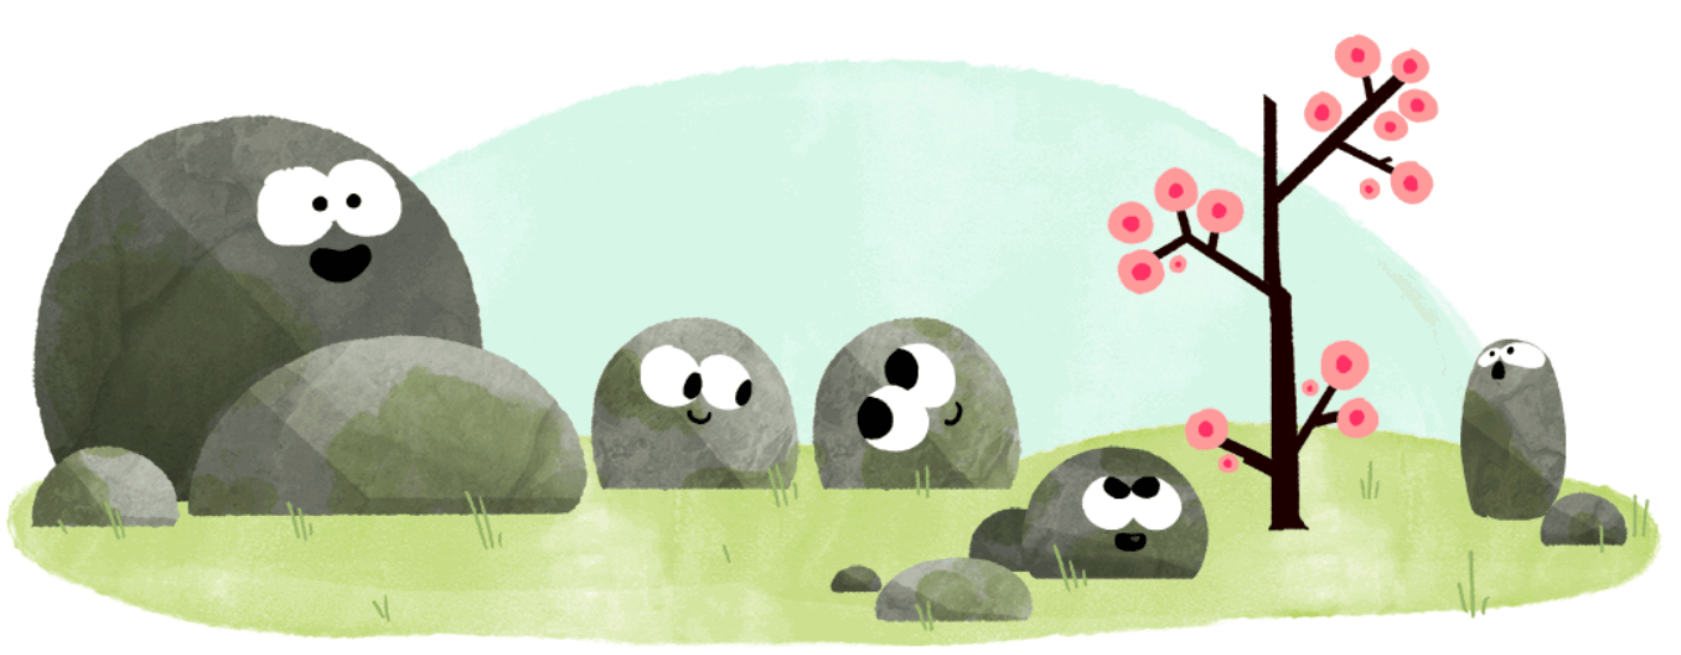 Spring Google Logo - Vernal Equinox Google doodle welcomes the first day of spring ...